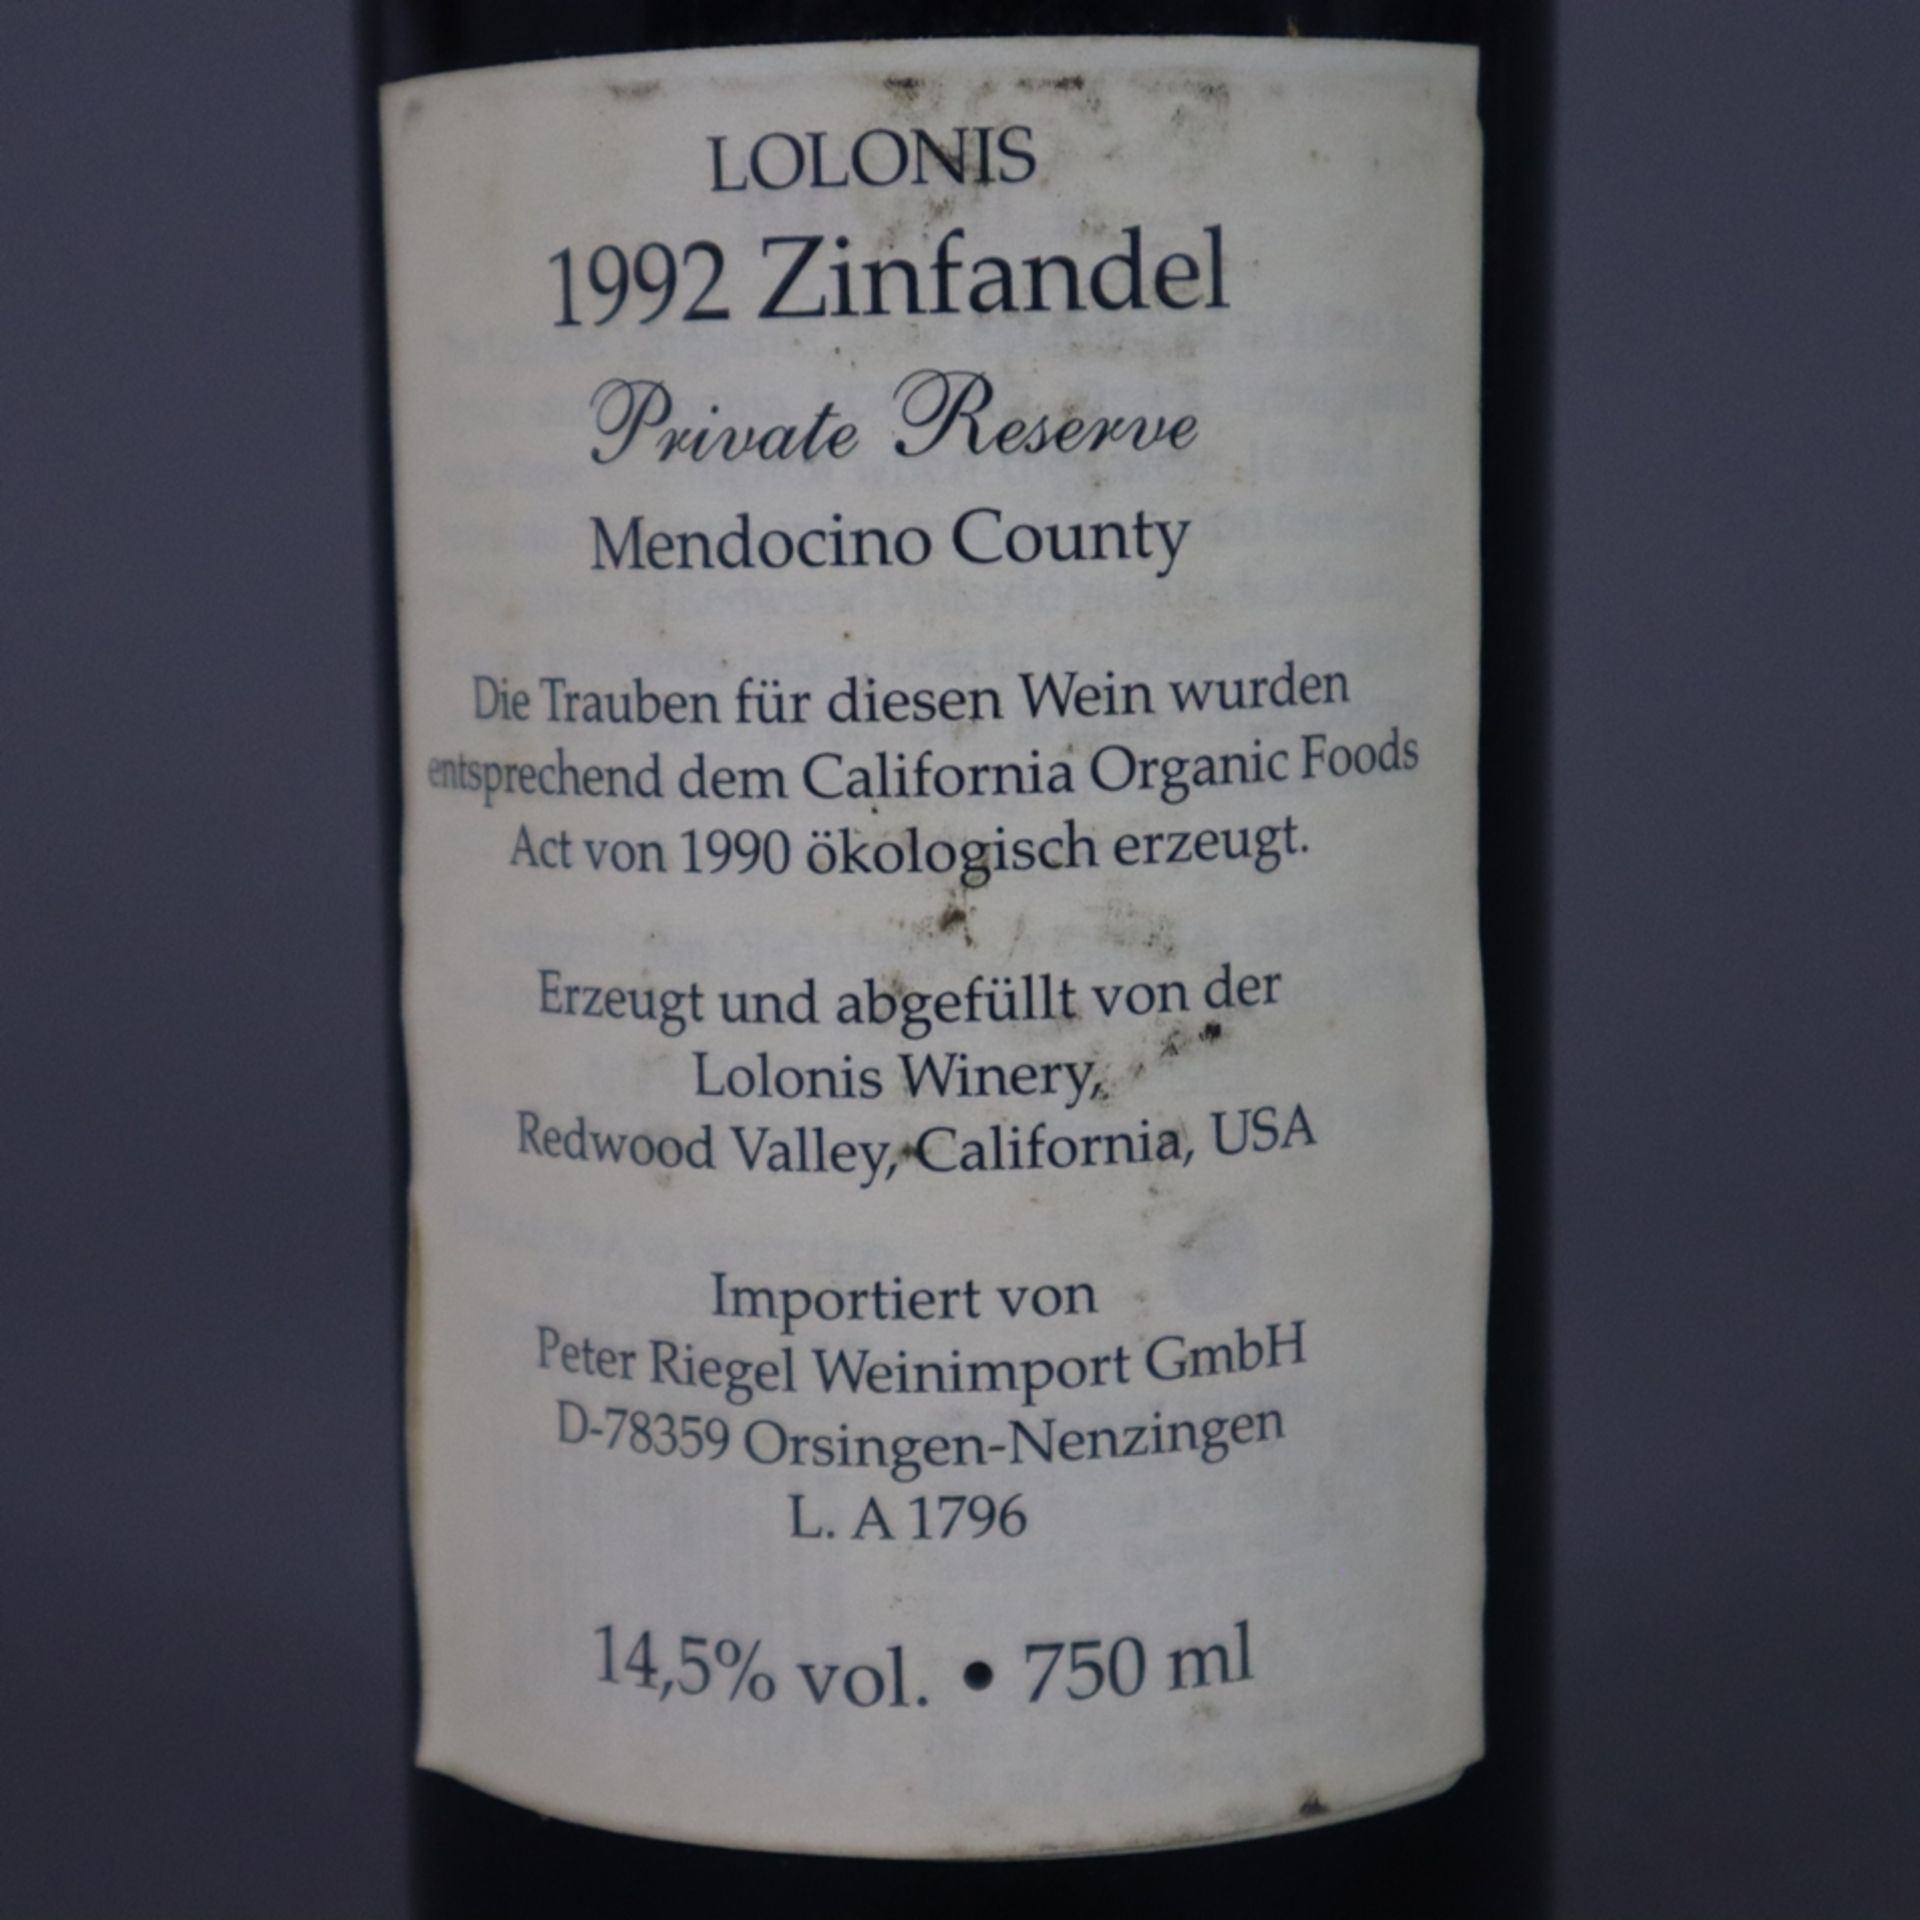 Wein - Lolonis 1992 Zinfandel, Private Reserve, Mendocino County, Lolonis Winery Redwood Valley, US - Image 4 of 4